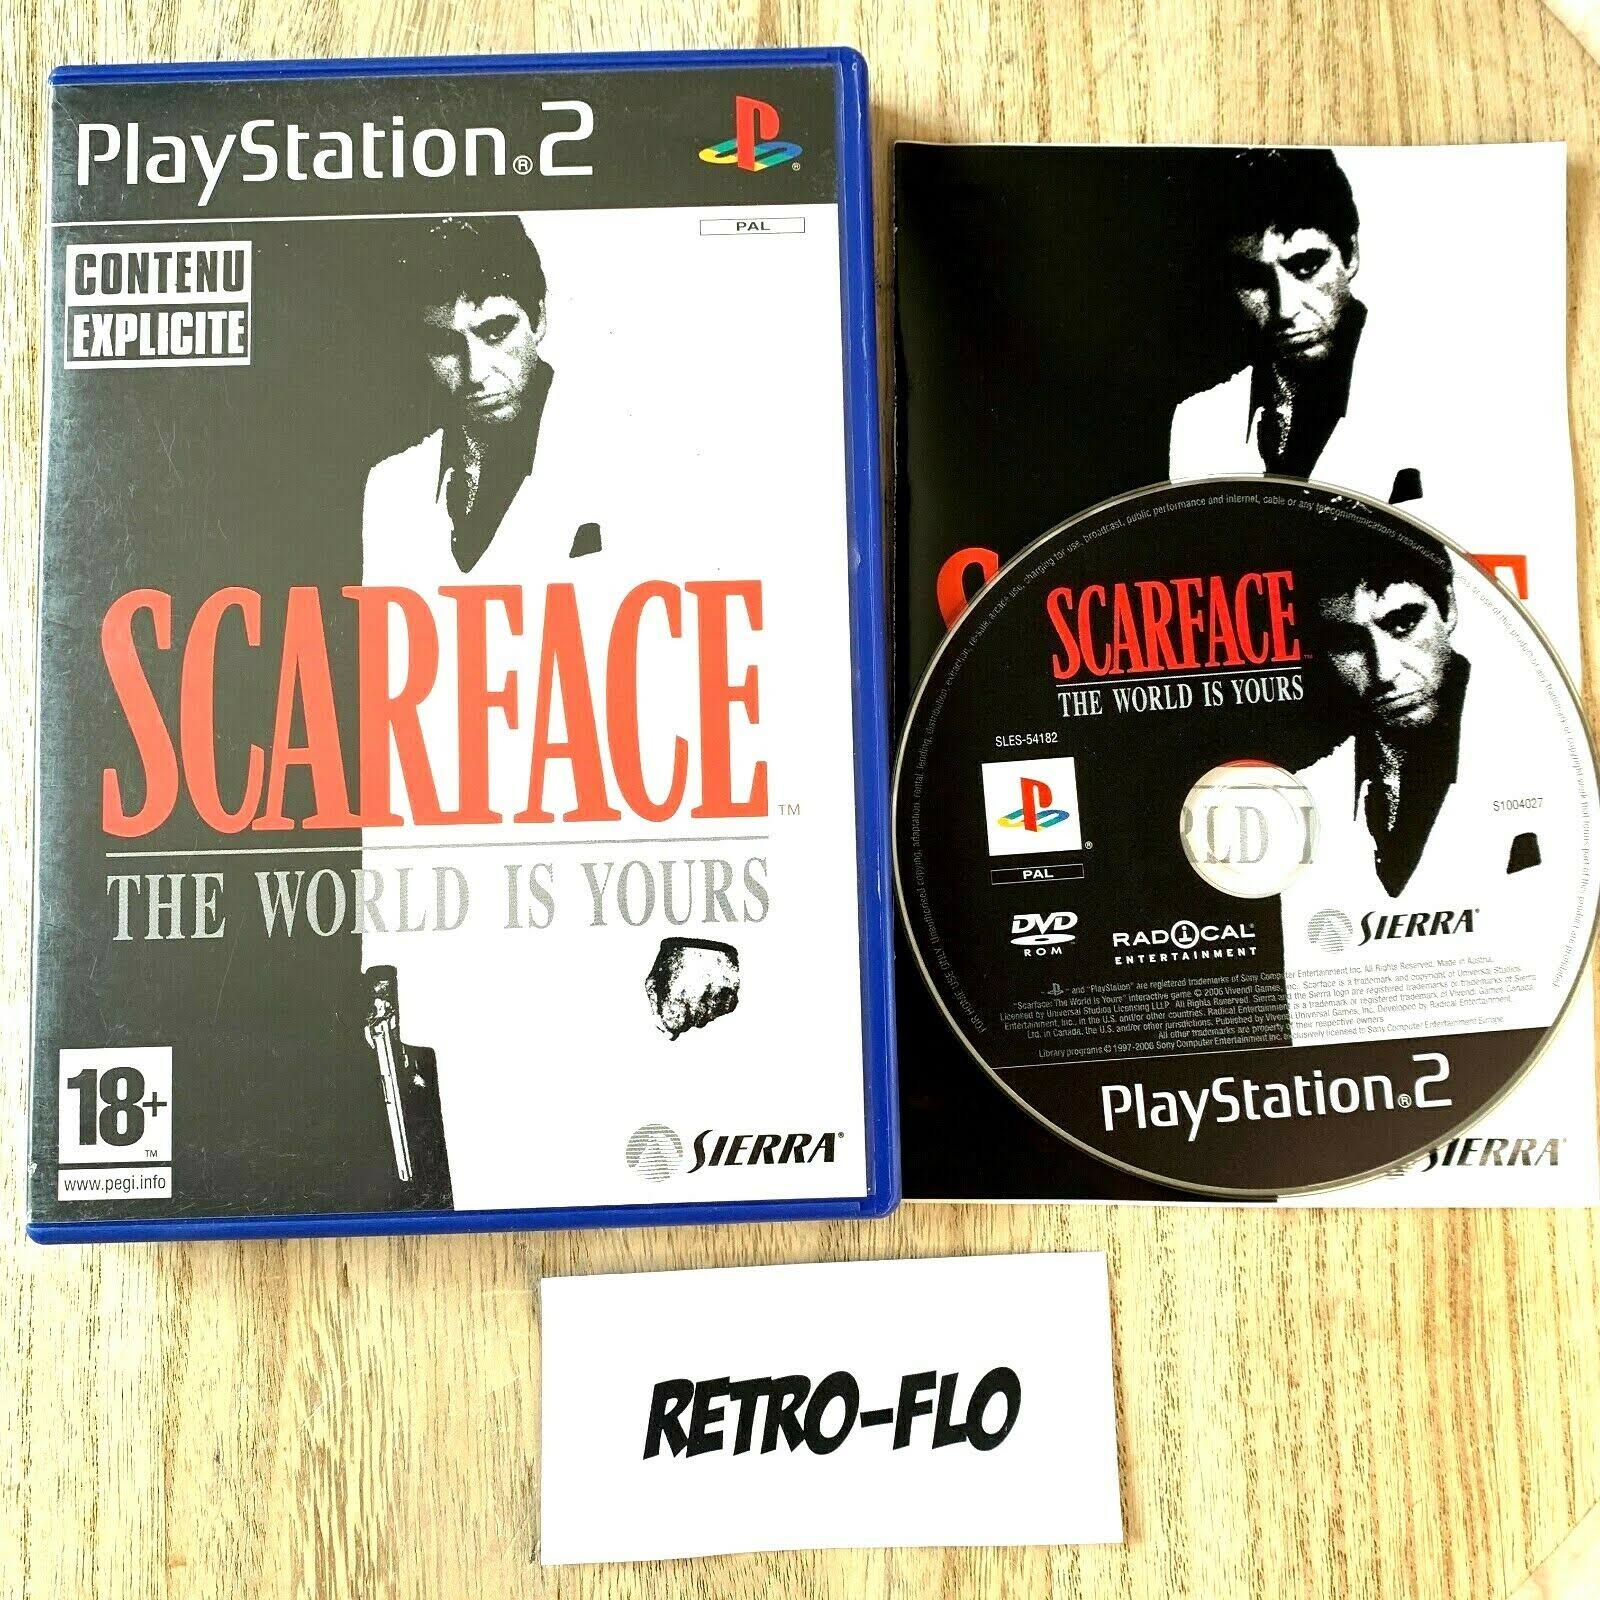 Scarface: The World Is Yours - Playstation 2